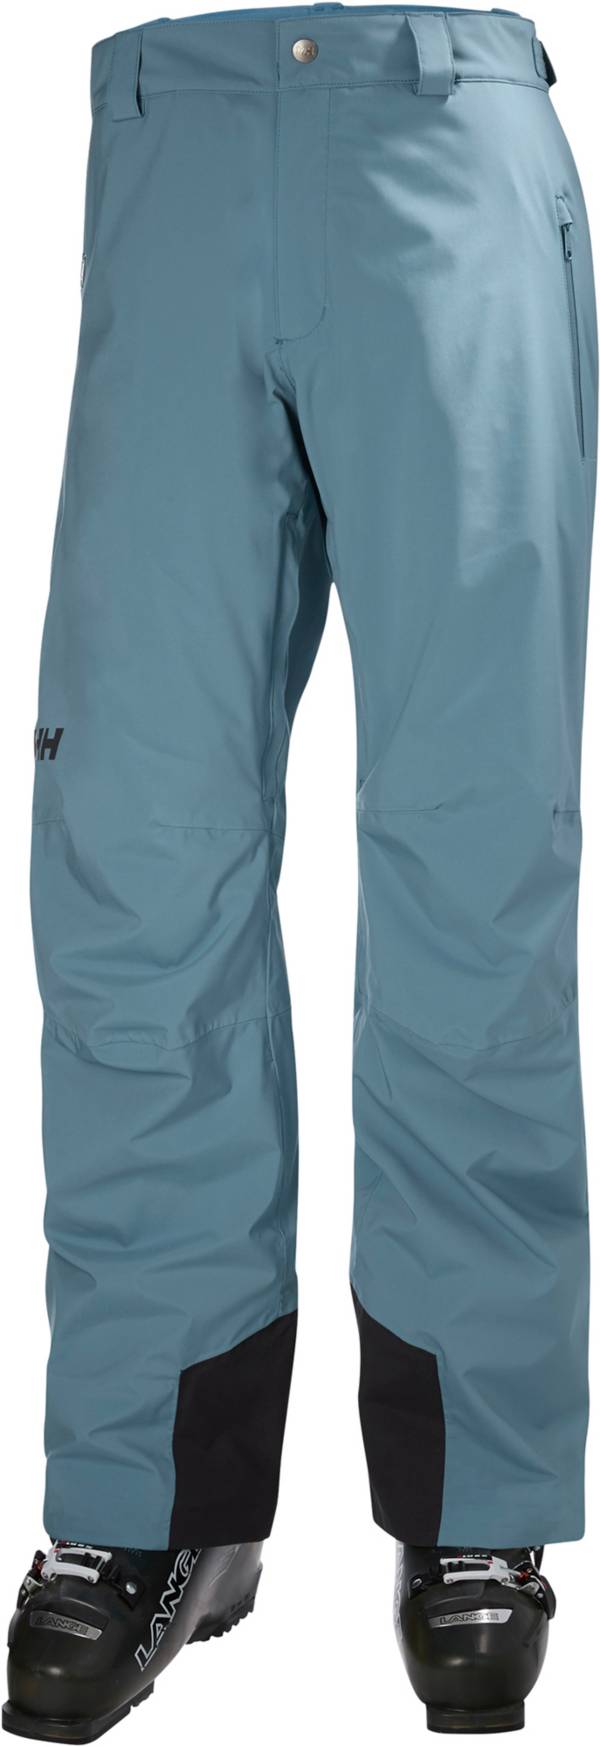 Helly Hansen Men's Legendary Insulated Snow Pants product image